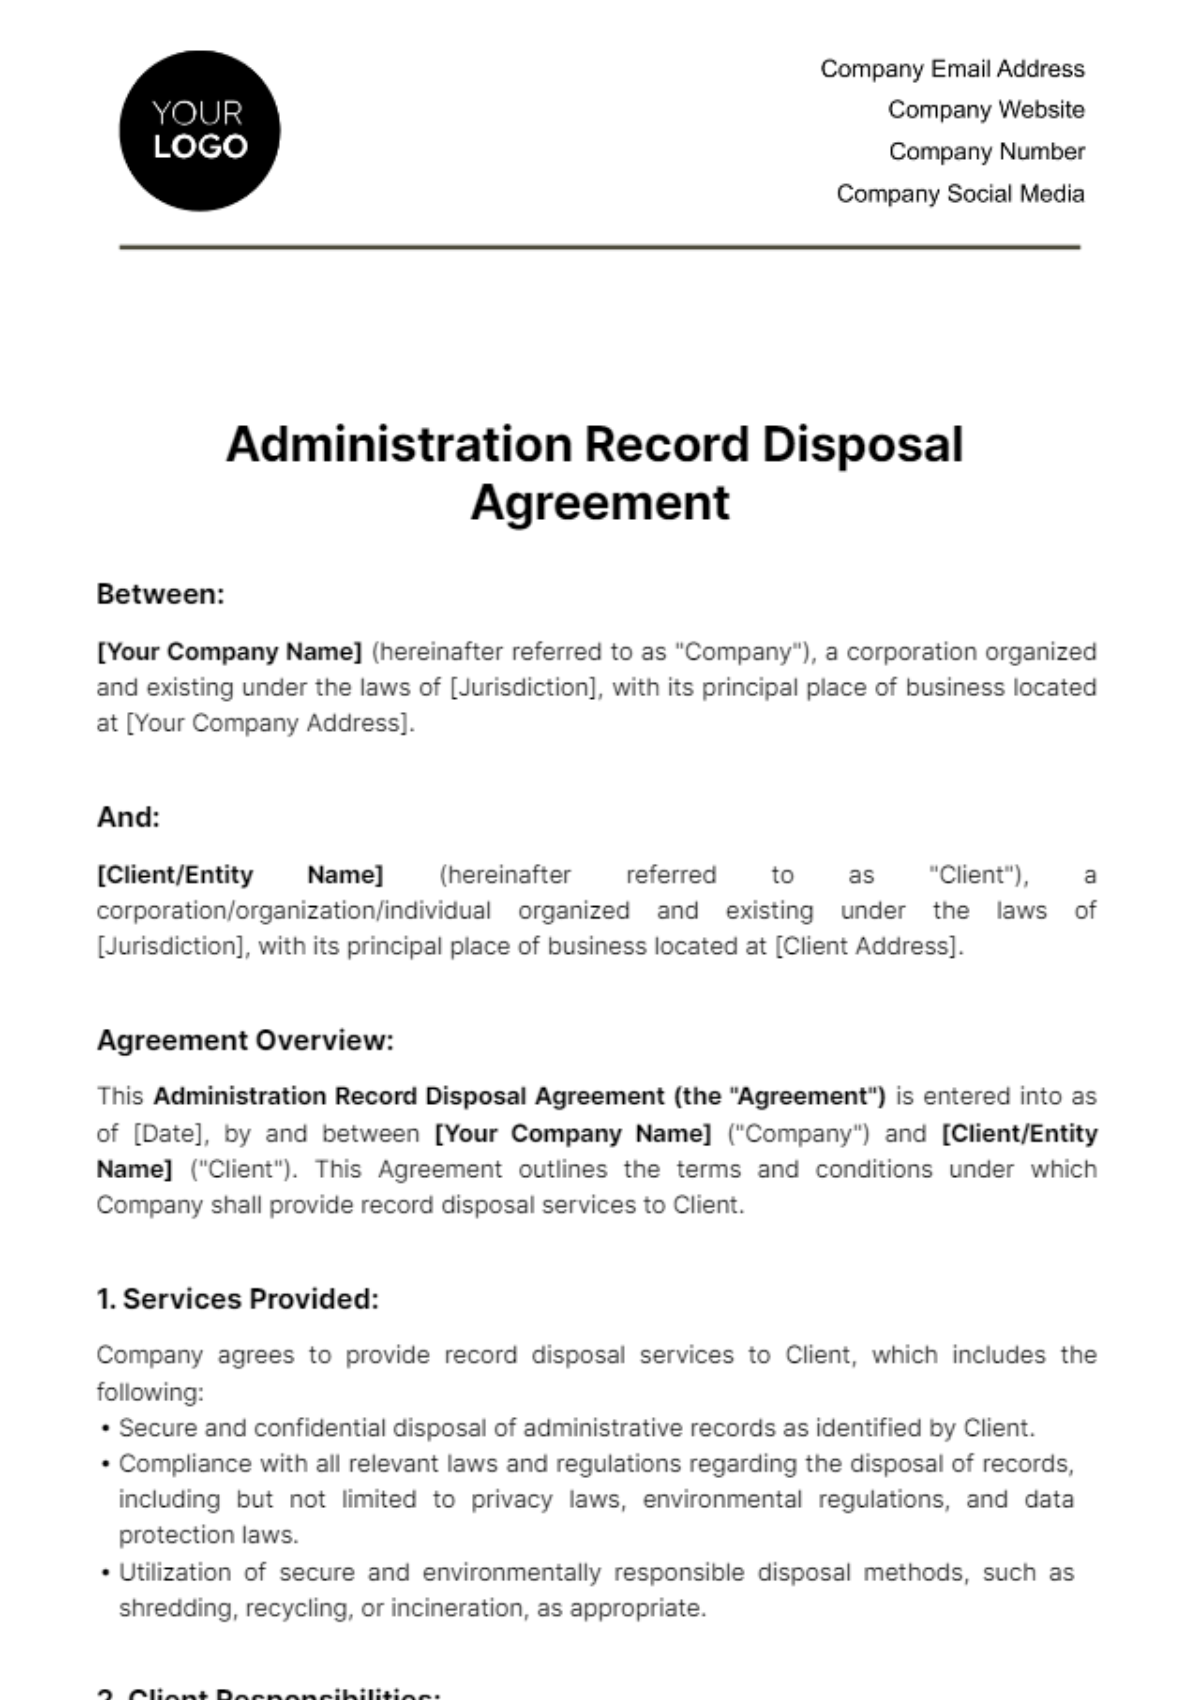 Administration Record Disposal Agreement Template